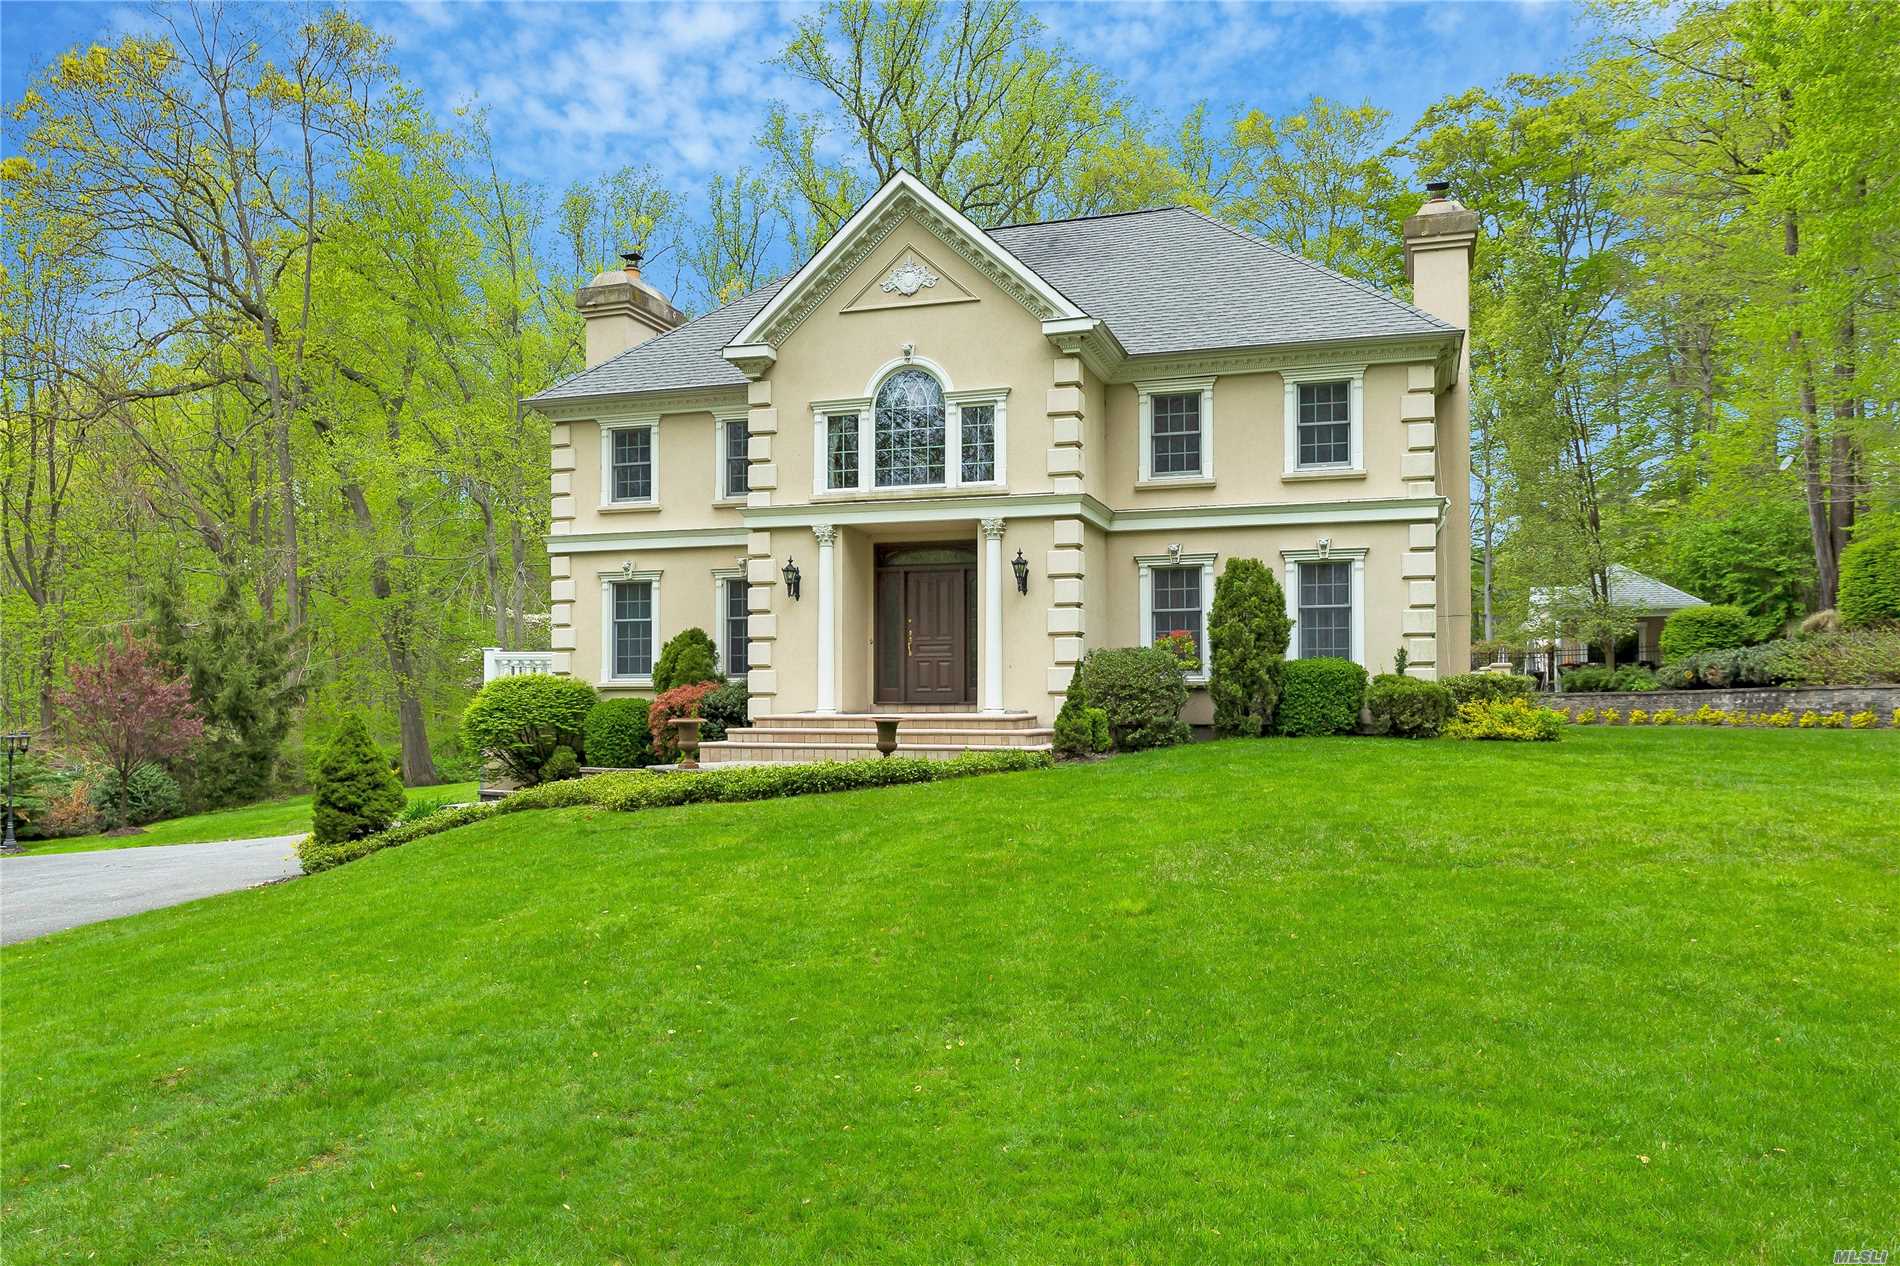 Standing regally on a gentle hillside, this timeless stucco French Colonial, with coins, hip roof, domed chimneys, elegant moldings, and coat-of-arms, welcomes guests up a long, winding drive partially shaded by stately, towering oaks. Off a quiet cul-de-sac in Lattingtown, this magnificent two-acre mini-estate is carved out of pristine woodland and features sweeping emerald lawns, stone-tiered gardens, and an entertainer’s-dream outdoor entertainment complex. An enthralling country-club ambiance carries on into the home’s bright and spacious, four-bedroom, three-bath interior offering a casual elegance with easy flow from space to space, natural-tone hardwood floors, elegant millwork, large windows, French doors, a fabulous finished basement, and a huge unfinished attic with expansion possibilities. On the shores of Long Island Sound, Lattingtown is the northernmost part of a larger area, fanning out from the village of Locust Valley, that is referred to by many as “Locust Valley,” just as all seaside communities on Long Island’s lower eastern peninsula are called “the Hamptons.” Located less than 30 miles from Manhattan, it has in recent years become a closer and more appealing destination for a younger generation of successful New Yorkers to live.  It is known for its grand estates, scenic vistas, country and golf clubs, and its proximity to yacht clubs, fine dining, quaint shopping districts, private and public schools, and the Long Island Railroad. 
Amidst serene gardens and rolling lawns with a backdrop of soaring trees, the rear property’s resort-like retreat begins with an expansive rear granite patio, ideal for al fresco dining, that leads via a bluestone path through gated estate-fencing to an enchanting inground, Gunite, salt-water pool that has been recently renovated like new. Hidden pool equipment includes a brand-new filter system with a super-quiet, four-speed pump, salt cell, and existing heater. Upgraded electrical equipment comprises six Intellibrite LED pool lights with multi-color functions and software for manual or phone/tablet control of lights, pump, heater, and waterfalls. An expansive surround and patio are enhanced by a new blue-tile raised wall containing a triple waterfall. A brand-new pool house, designed, architecturally drawn, and built from the ground up, boasts central-air conditioning and heat for year-round enjoyment. A large great room contains a granite-topped kitchenette with center island, high-end refrigerator, freezer drawers, ice machine cabinet, and dishwasher. There is a full bath with a glass enclosed indoor shower plus an outdoor shower with its own brand-new septic system. A Nana window system opens the kitchen to a six-foot bar, with ample seating, in one of two raised verandas overlooking the pool.
The interior begins with a two-story central foyer, with elegant staircase, extending through to kitchen and French doors accessing the rear deck. The living room is flooded with light through two six-over-nine front windows and French doors to a side balcony flanking a massive marble fireplace. The formal dining room opens through wide French doors to a versatile sitting room, with direct access to the kitchen, ideal for additional seating or buffet for large dinner parties. The sky-lit, vaulted-ceiling kitchen enjoys custom cabinetry with white marble countertop, high-end appliances, a farm sink overlooking the patio, a pantry, and a delightful breakfast area offering gorgeous vistas through a bay of six large windows. A hall off the foyer leads to a lovely marble full bath and a spacious study/family room with fireplace and French doors to the rear patio. This area could easily convert to a first-floor master suite if desired. 
The second-floor master suite offers a large bedroom with ample closets and room for more, a gorgeous marble master bath with whirlpool tub and glass-enclosed shower, and access to a private balcony overlooking the foyer with Palladian window and two closets. Two additional bedrooms share an attractive hall bath. The fabulous finished basement is ideal for entertaining and has access to the driveway. It includes a great room with fireplace, game room, gym, bonus/sound room, bedroom, full bath, and access to the attached two-car garage. Offering the quintessence of “Gold Coast” luxury living, this exceptional pristine home is ready for you to make it your own Shangri-la.